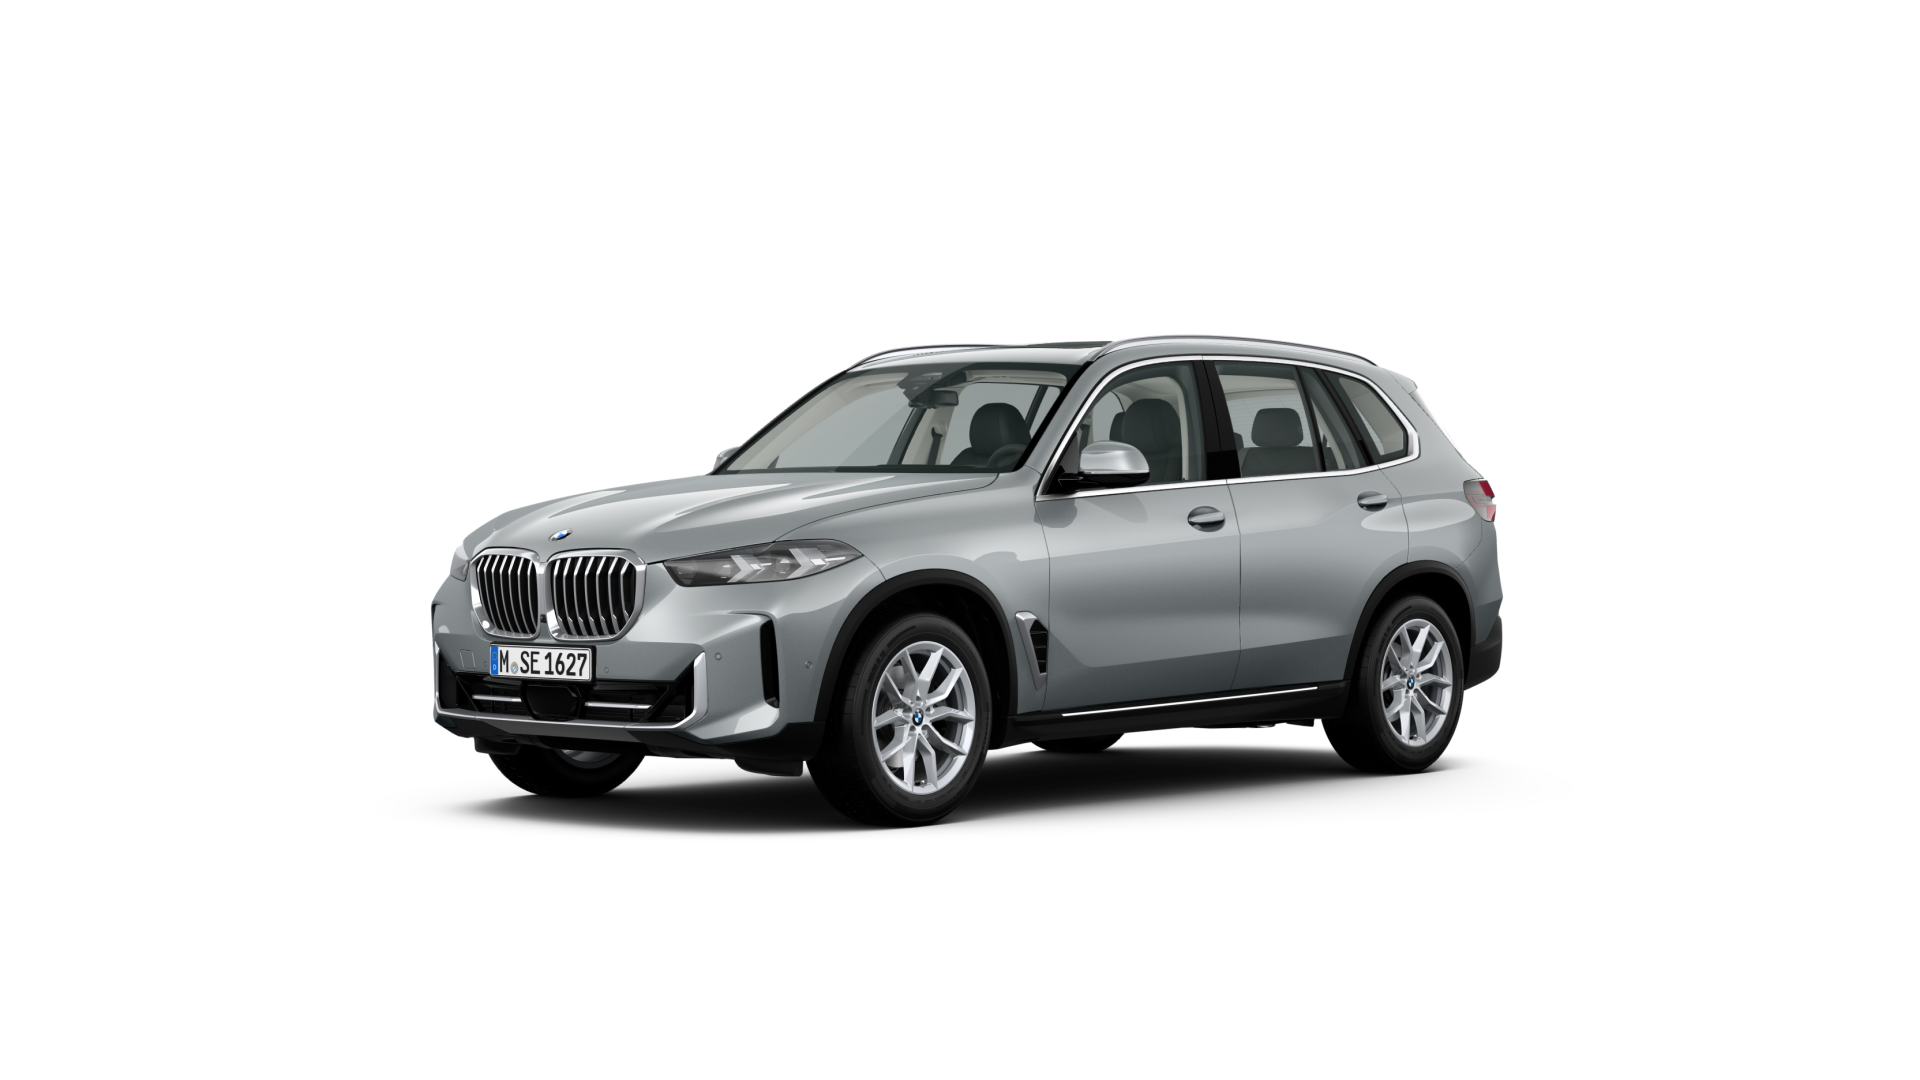 Bmw x5 xdrive40i 7 seater front side